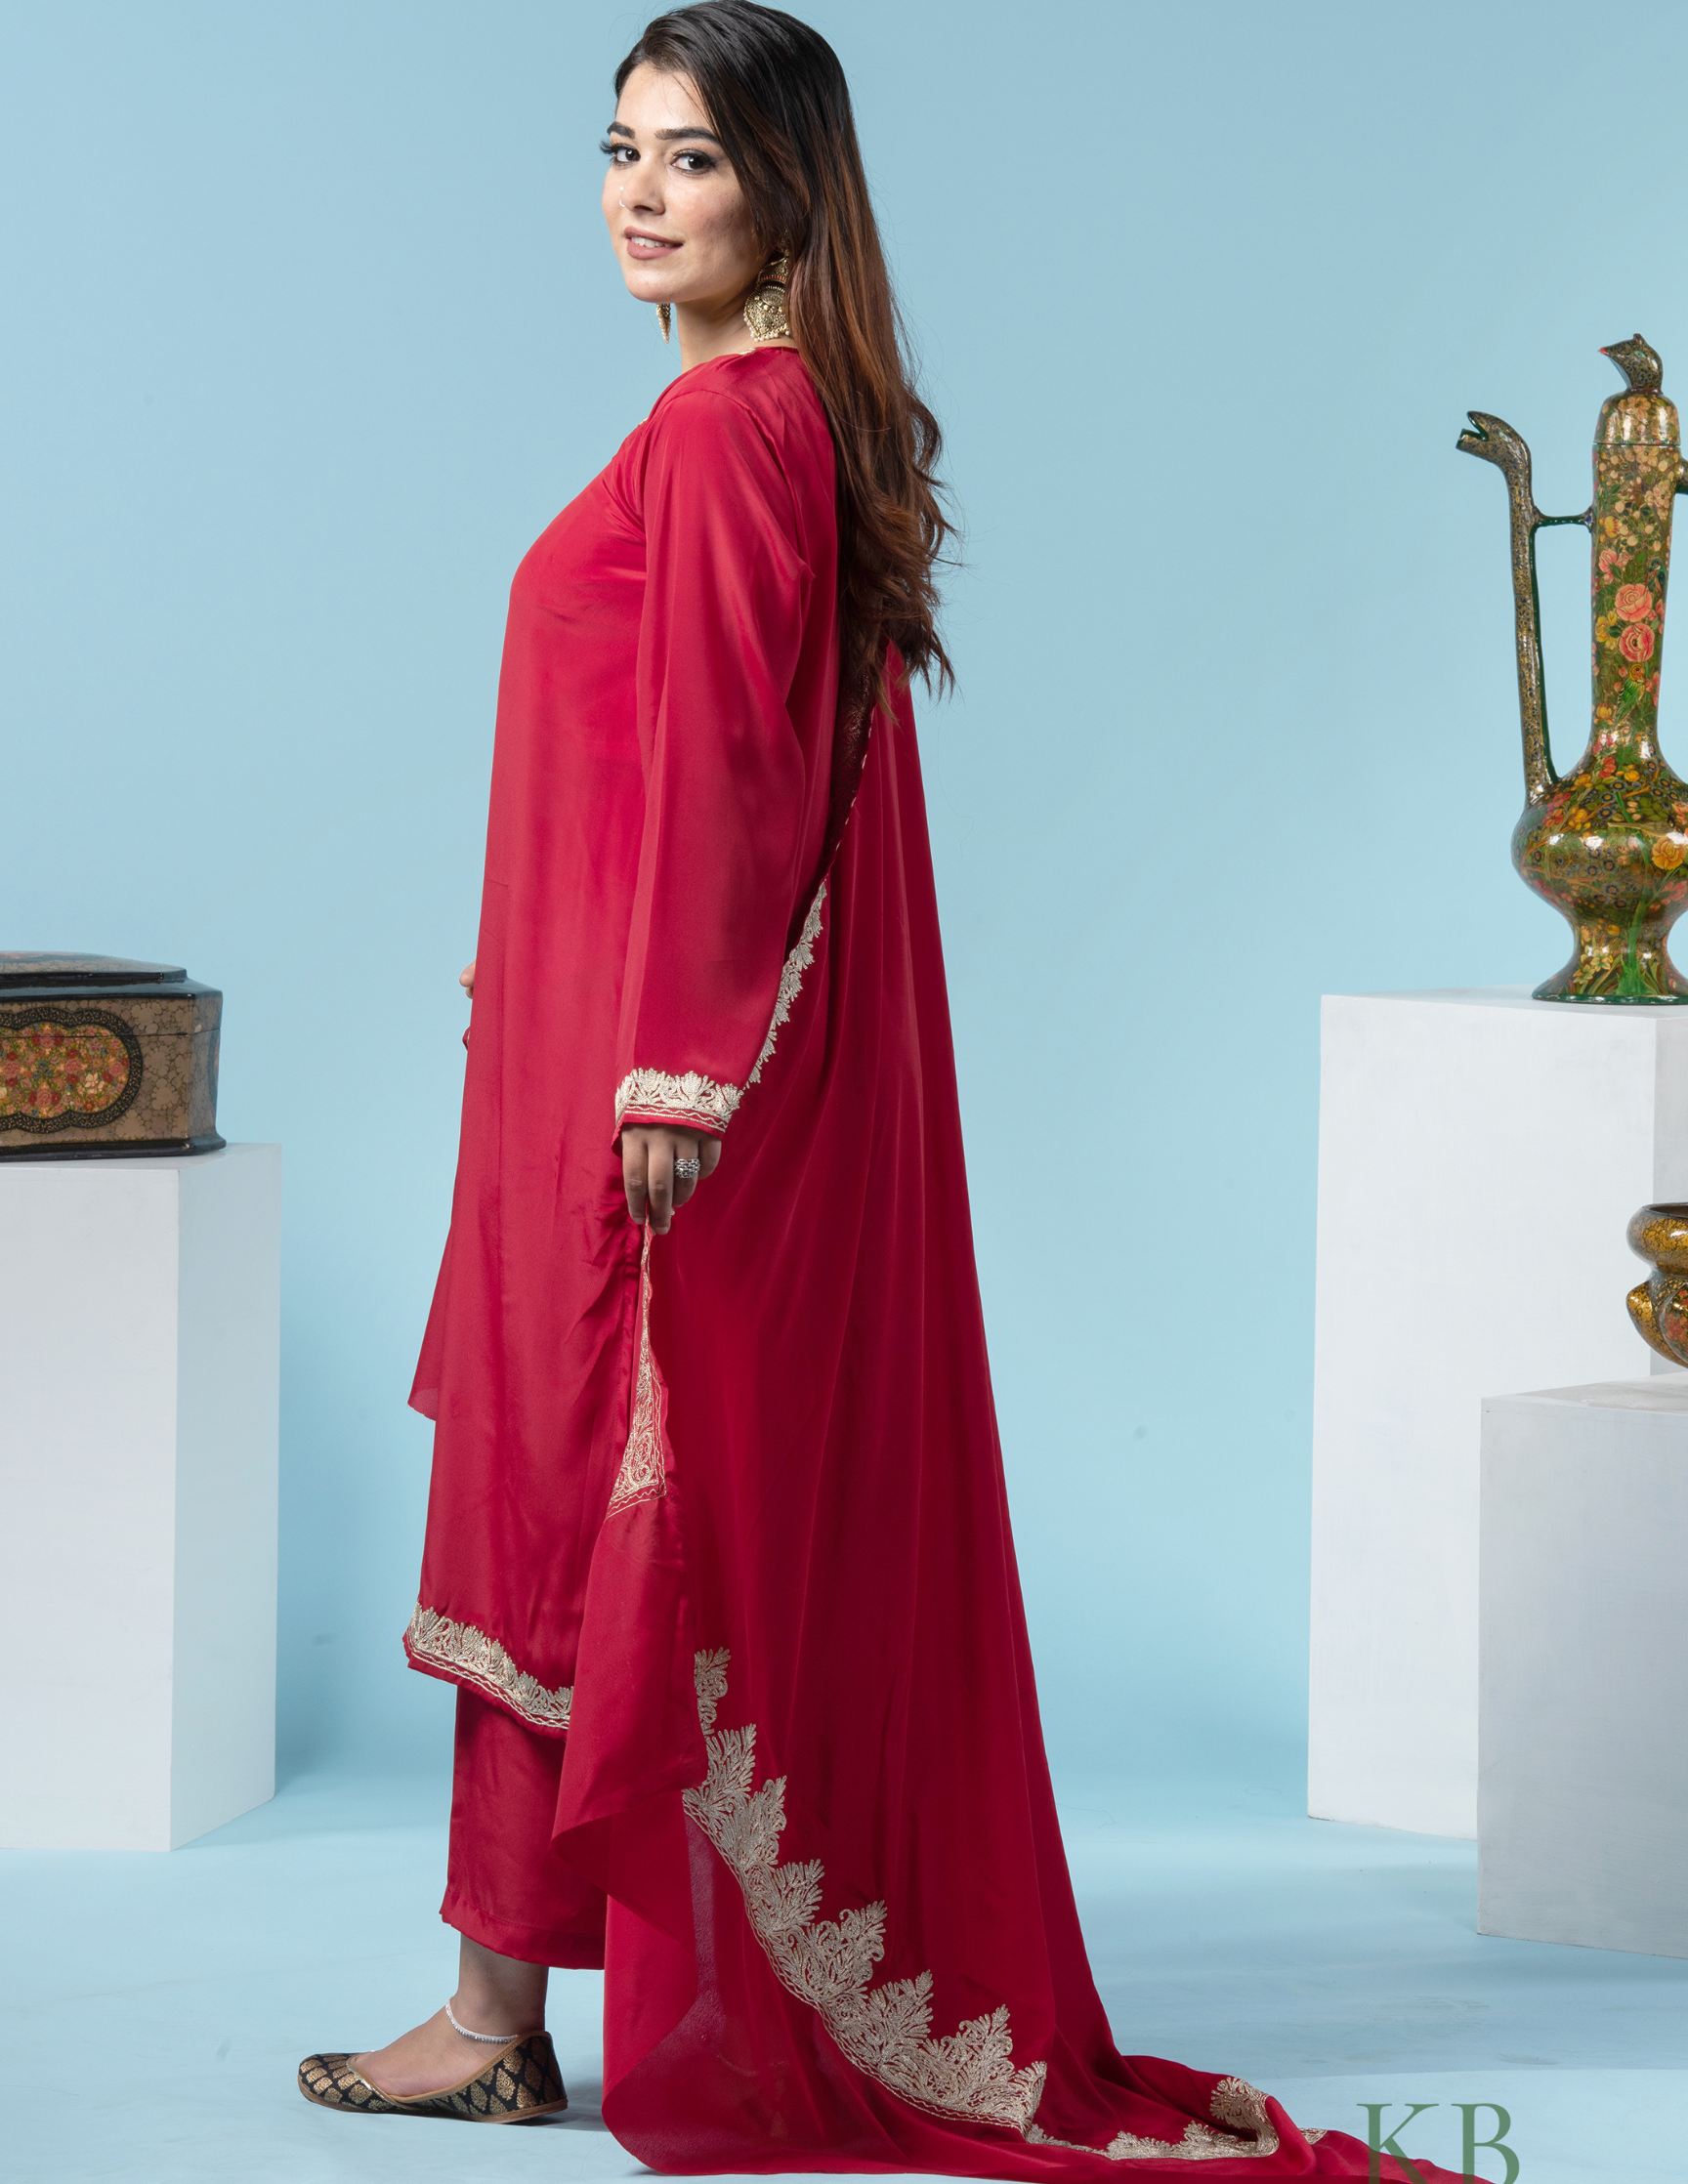 Fitoor Zari Embroidered Red Crepe Suit with 2.5 Meters Dupatta - Kashmir Box